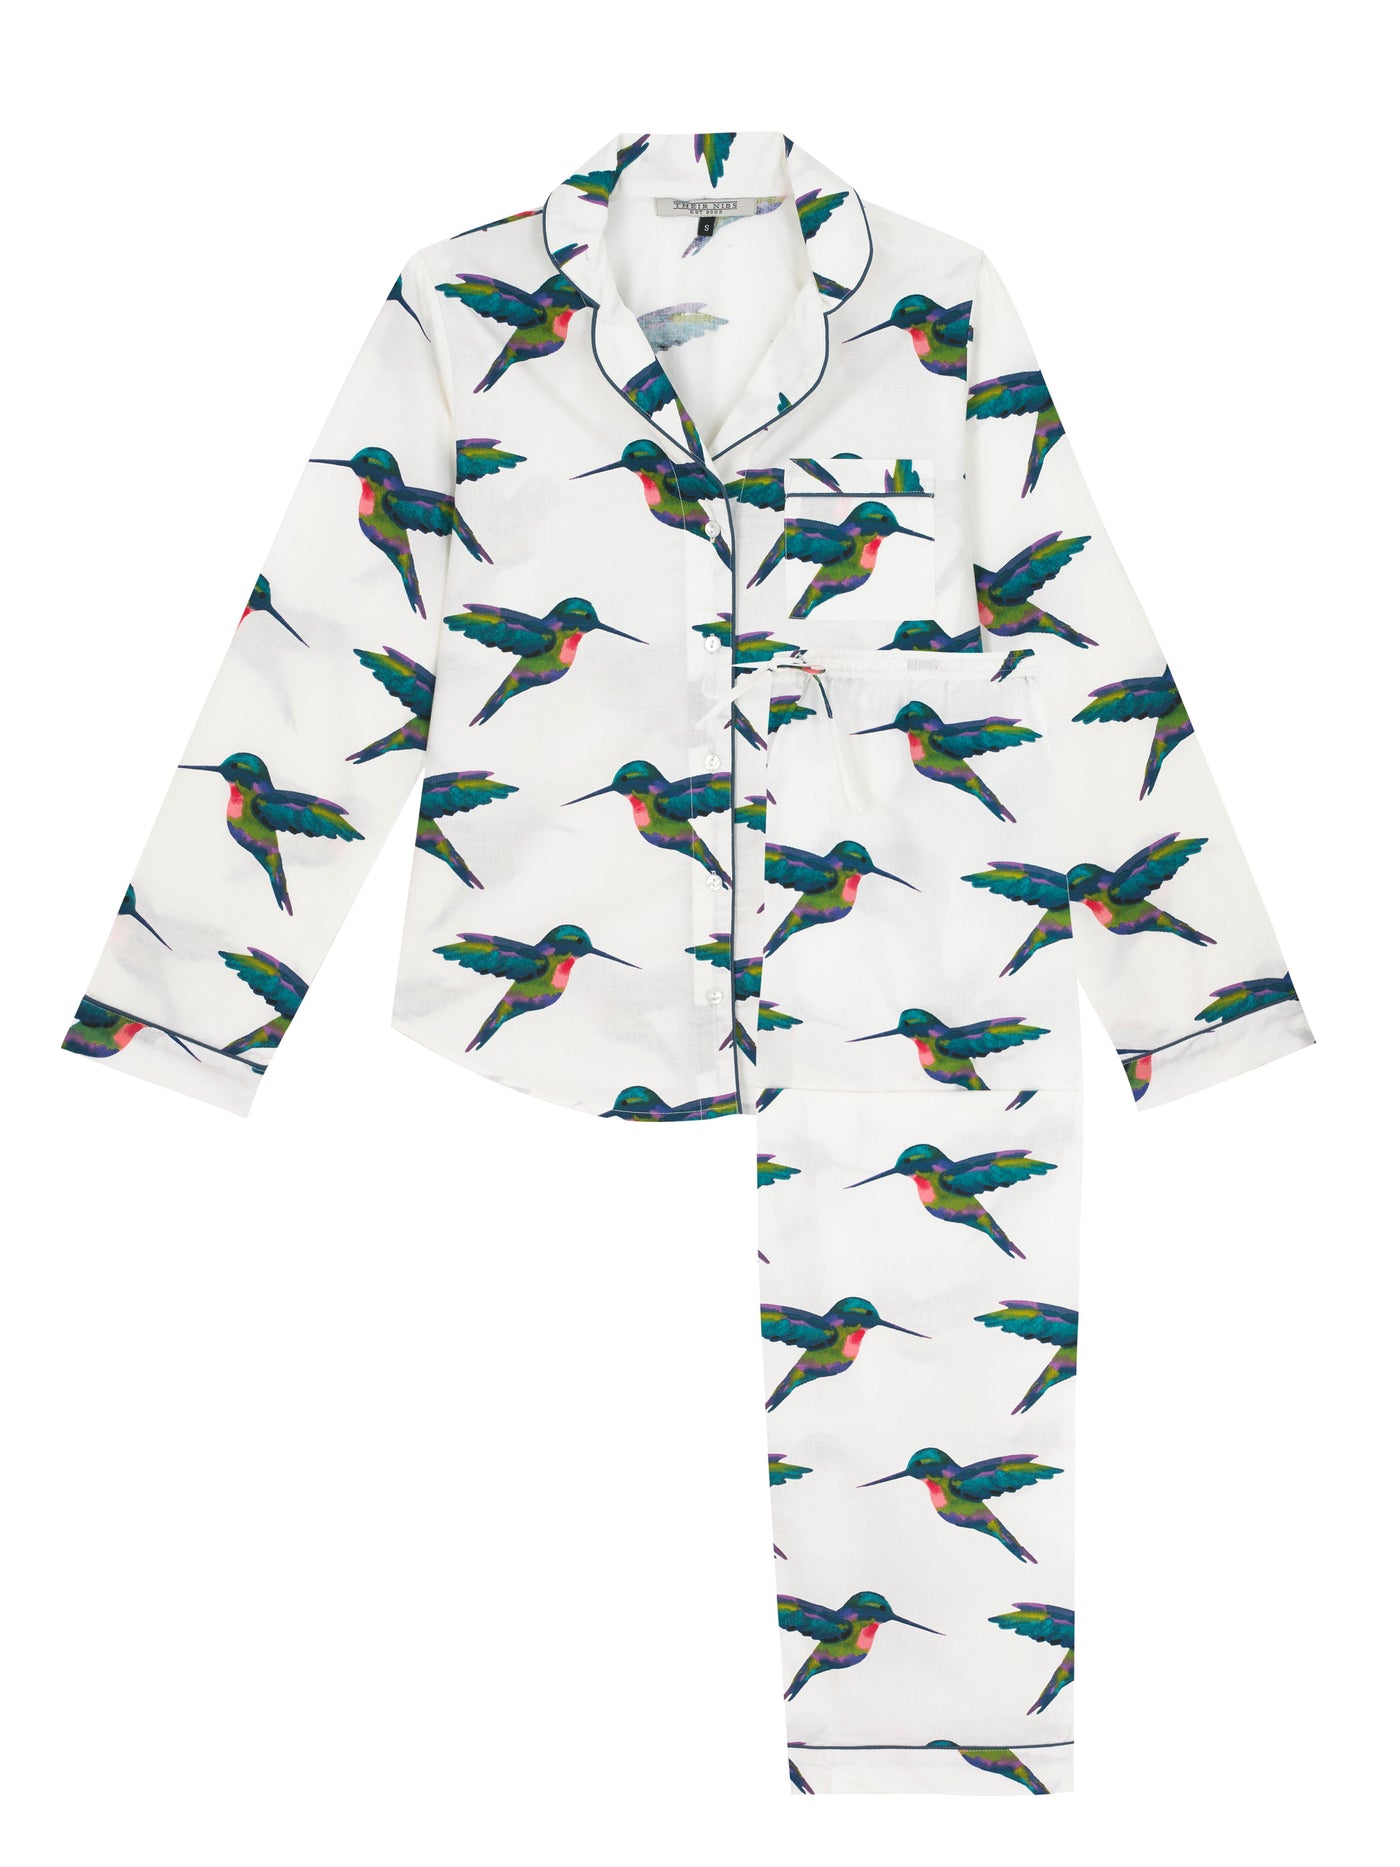 Flat shot of womens Cotton, full length, shirt and trousers Pjs, White base, multicoloured Hummingbird's in flight pattern